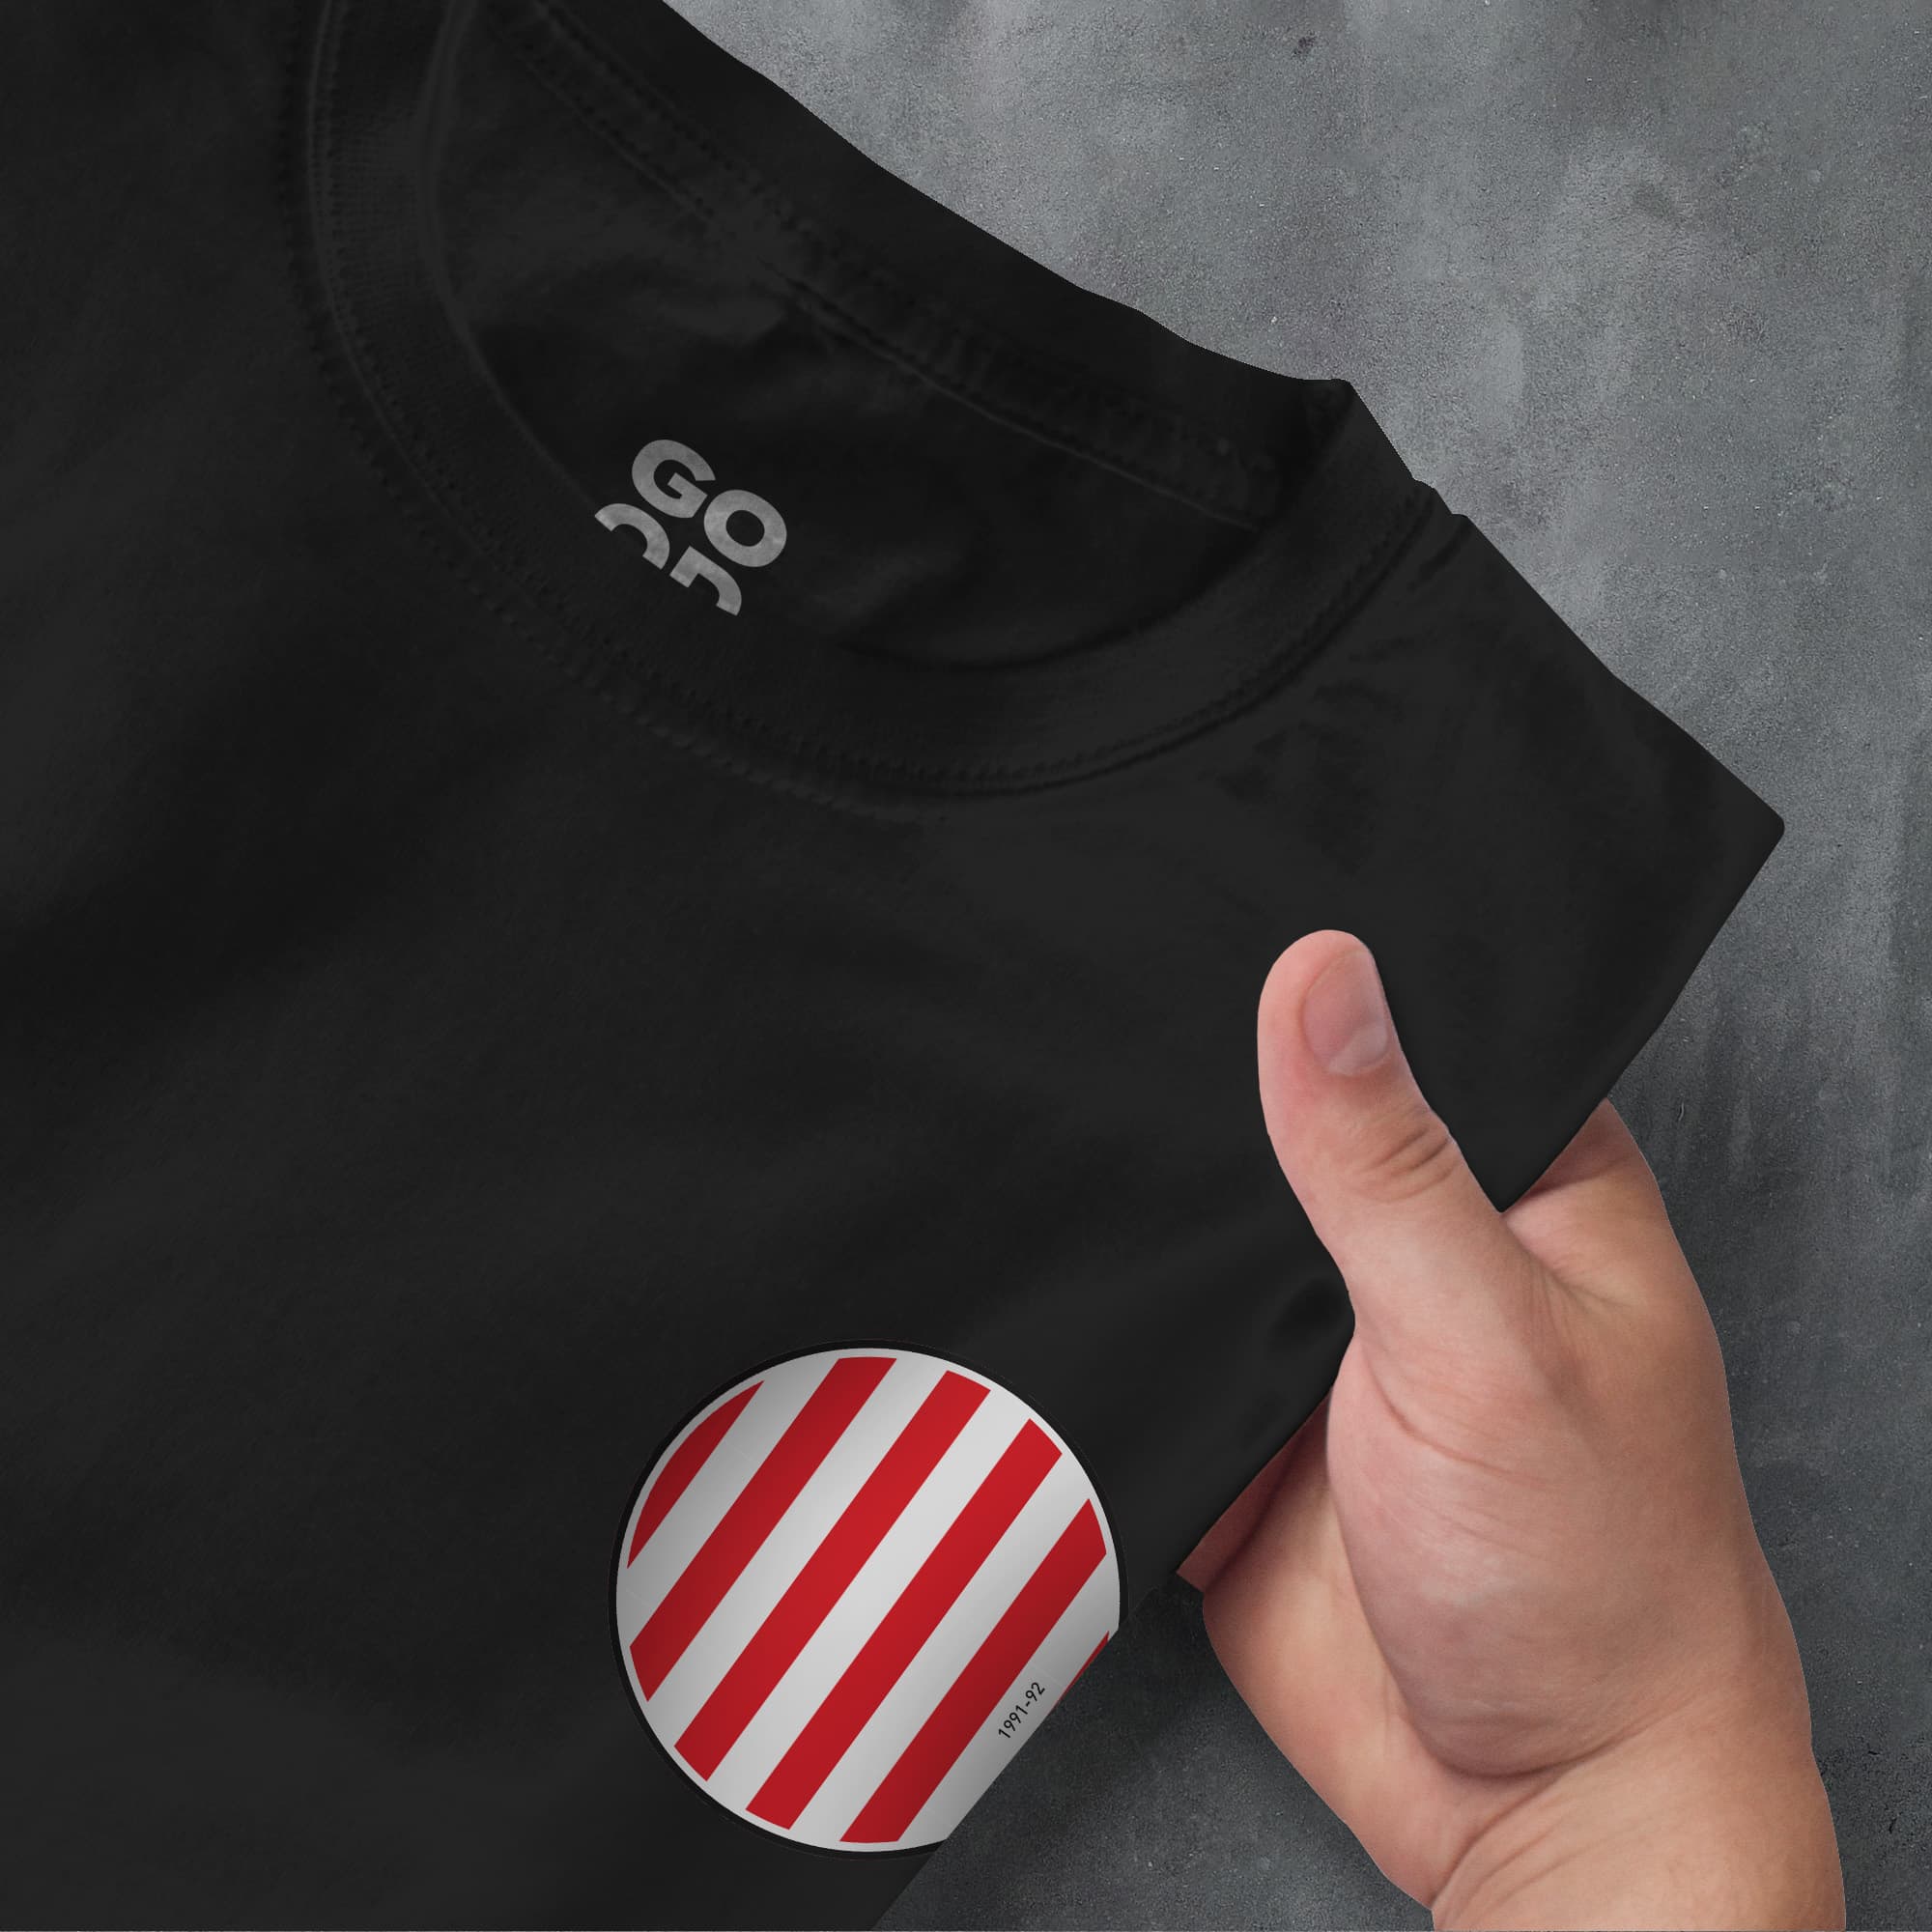 a person holding a red and white striped sticker on a black shirt